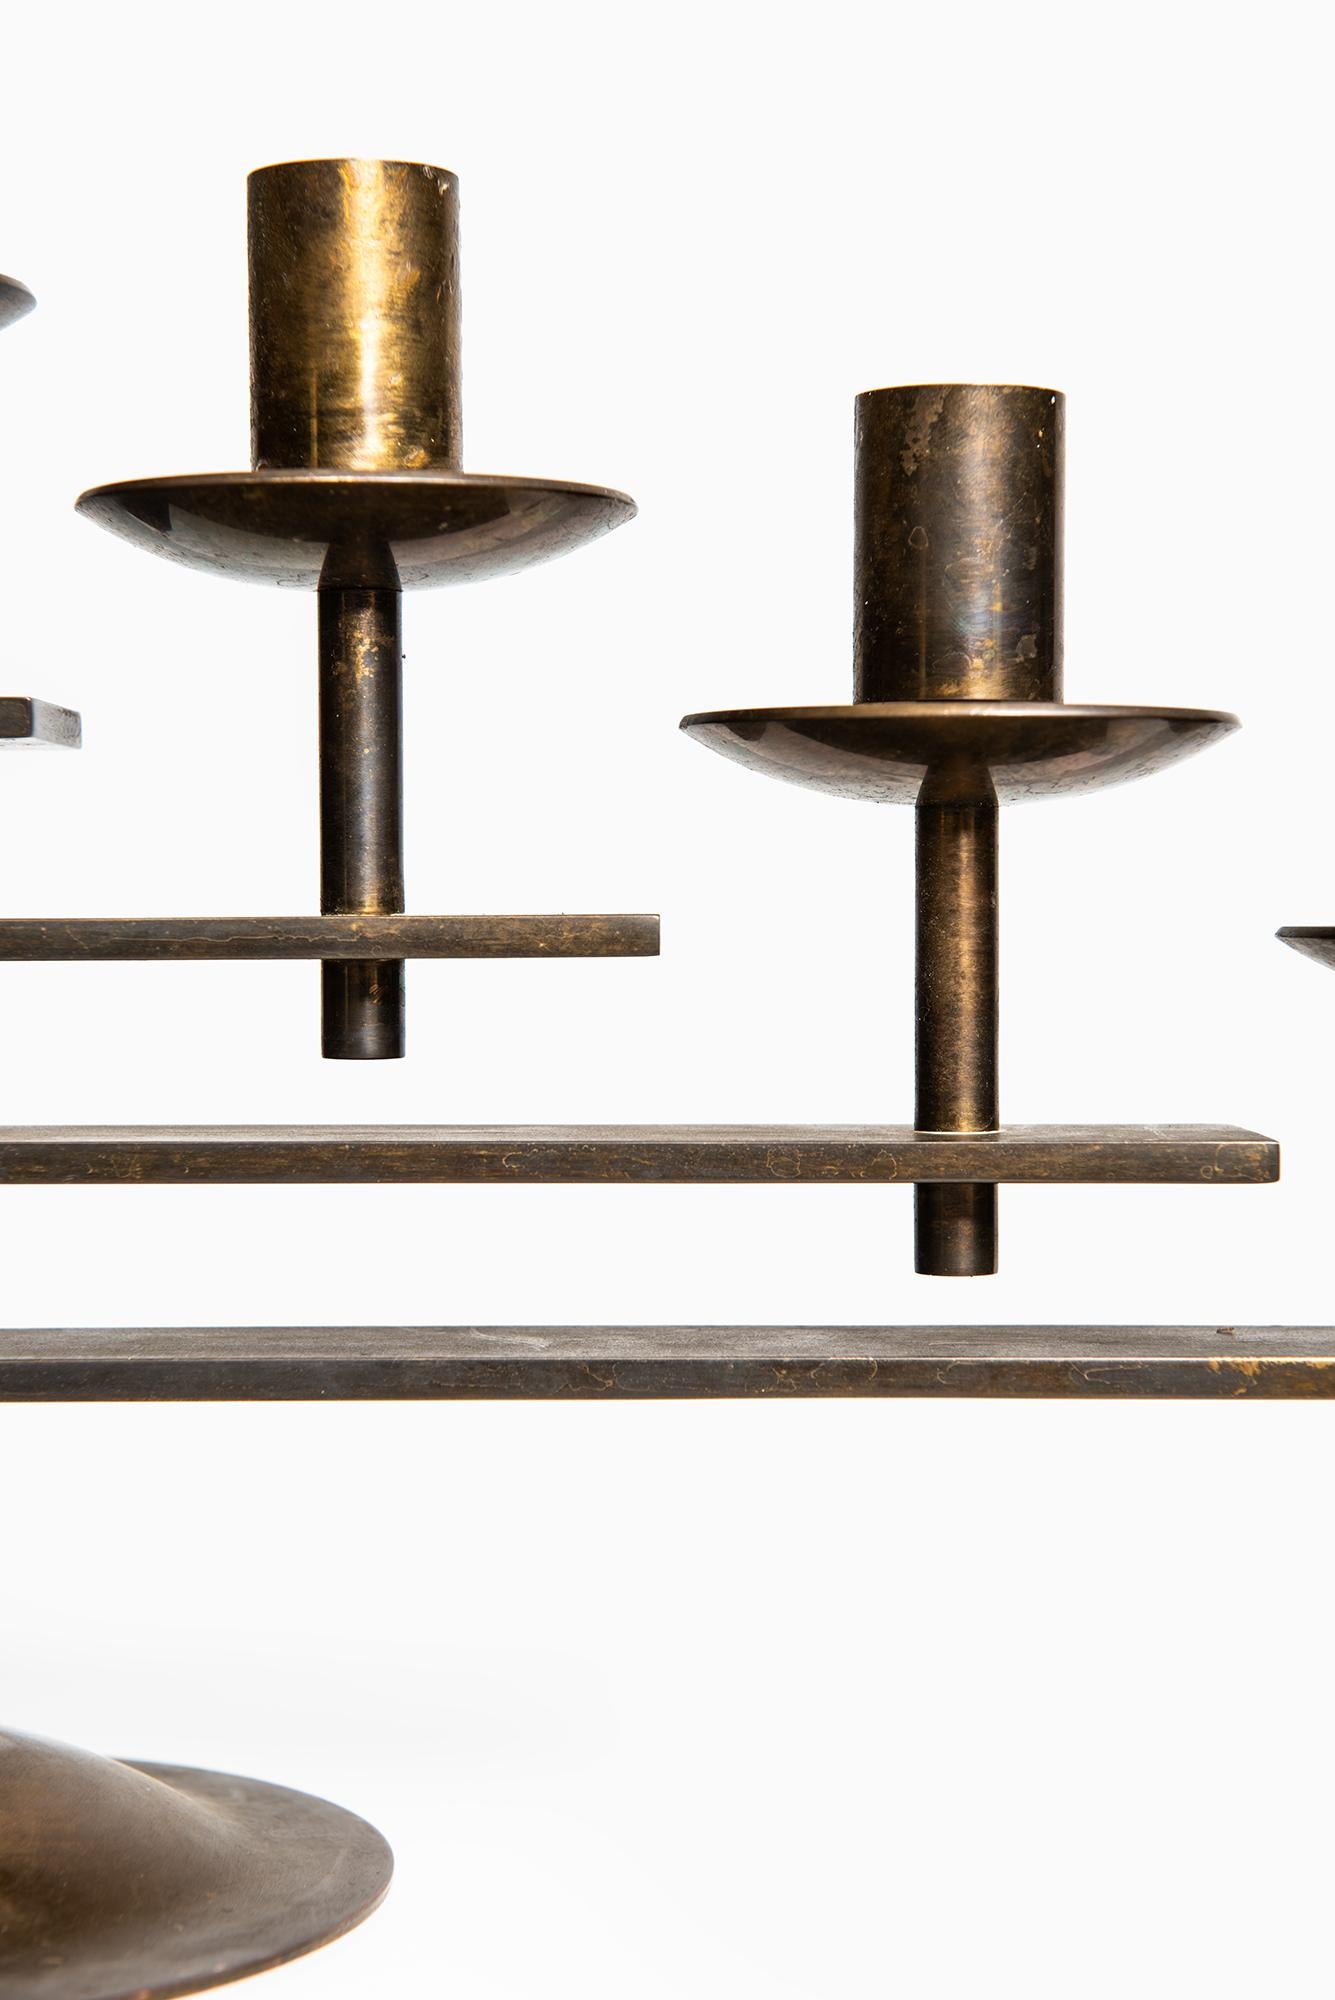 Rare and heavy candlestick in brass produced in Denmark.